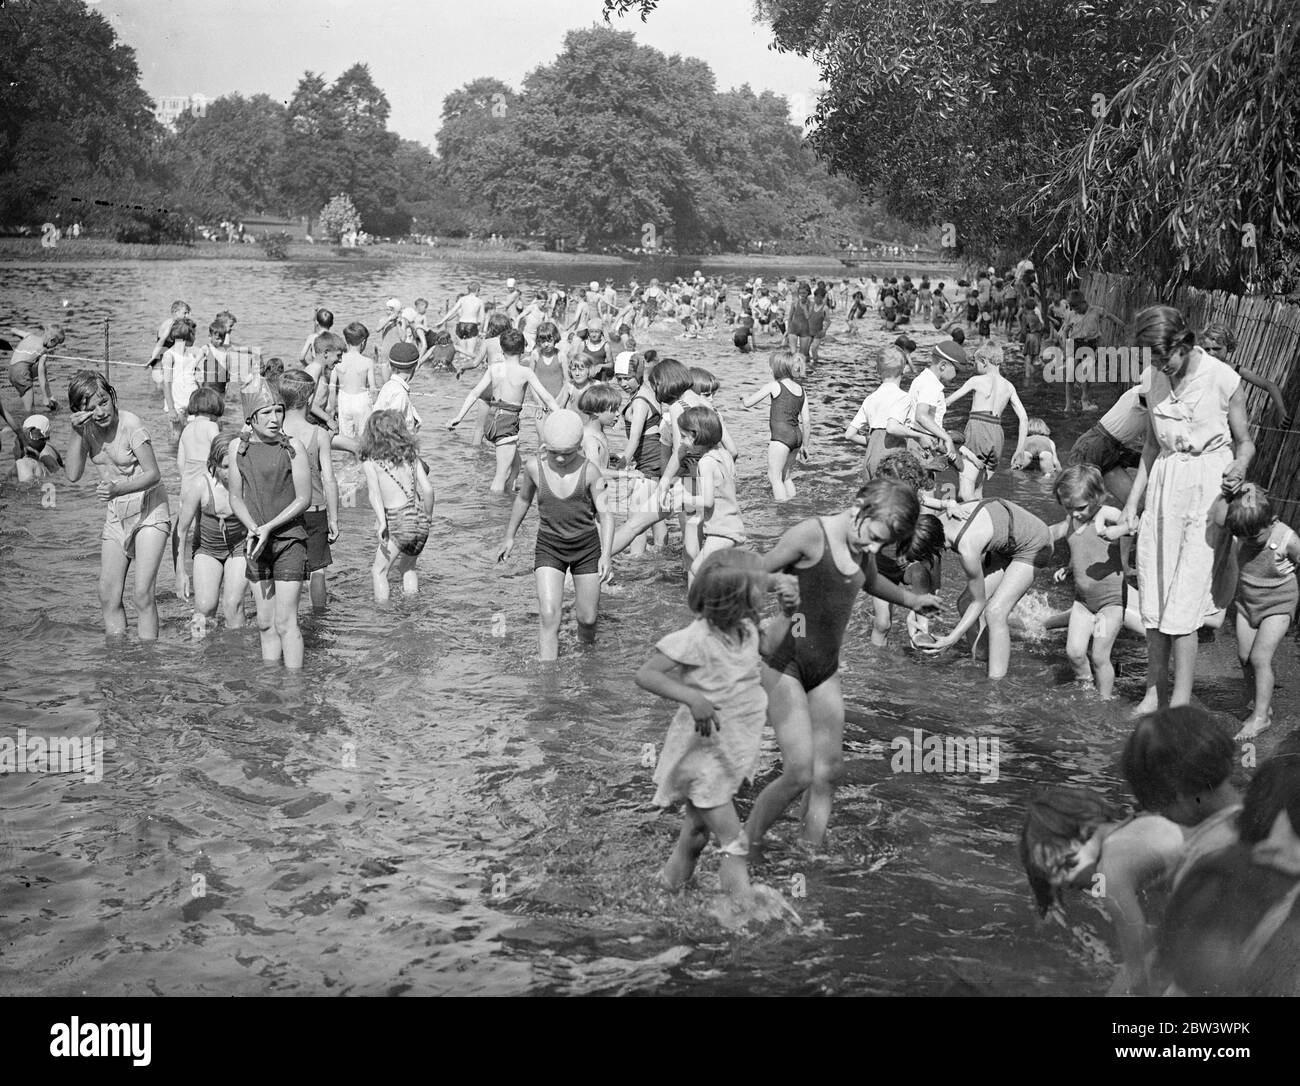 Young Londoners Go A - Paddling In The Heat Wave The heat wave has arrived in time to delight the hearts of thousands of London schoolchildren who are having their summer holidays . St James ' s Park with its swings and other apparatus and its cool paddling pond is attracting crowds of boys and girls . Photo shows : The pond crowded with young paddlers in St . James ' s Park 17 Aug 1936 Stock Photo